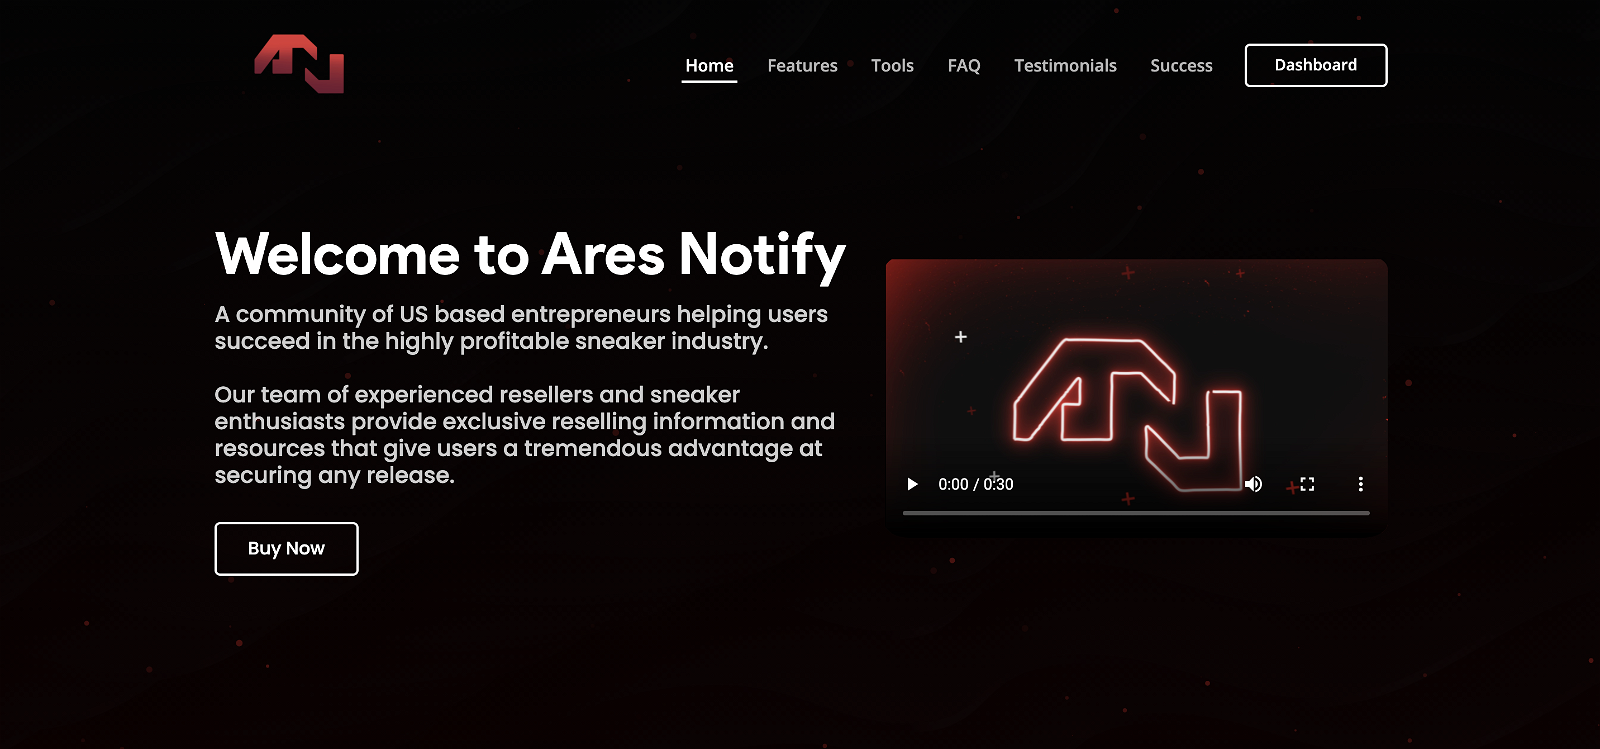 Ares Notify cook group presentation banner